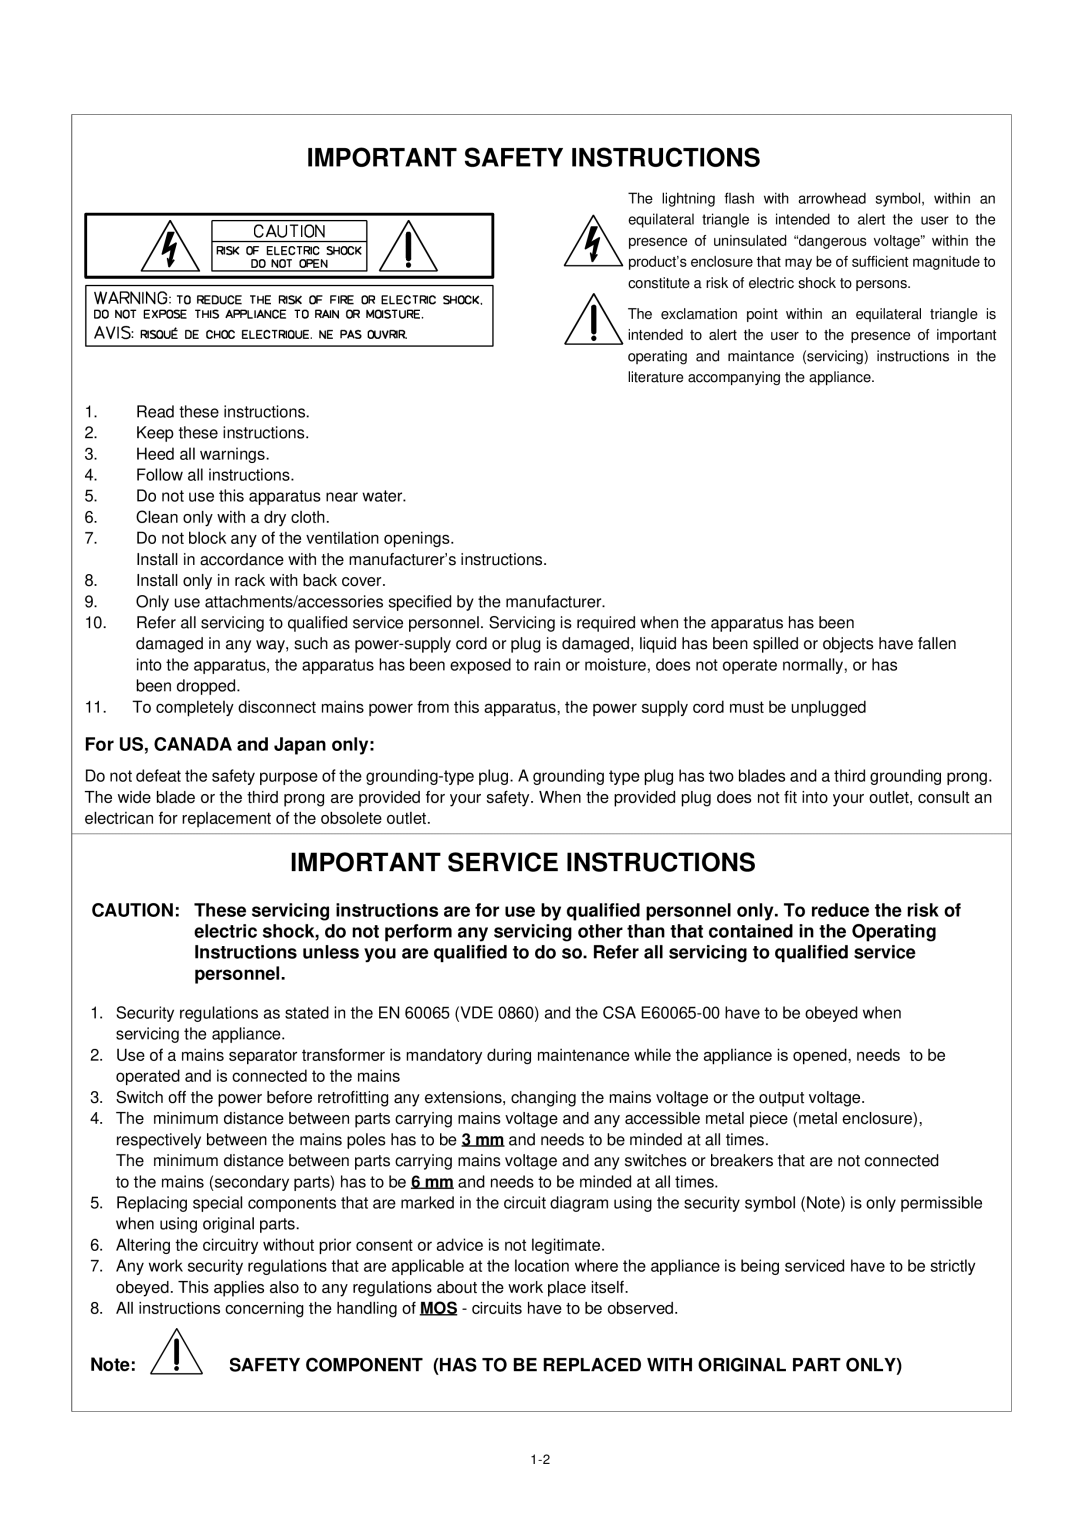 Dynacord DRM 4000 owner manual For US, Canada and Japan only, Safety Component has to be Replaced with Original Part only 